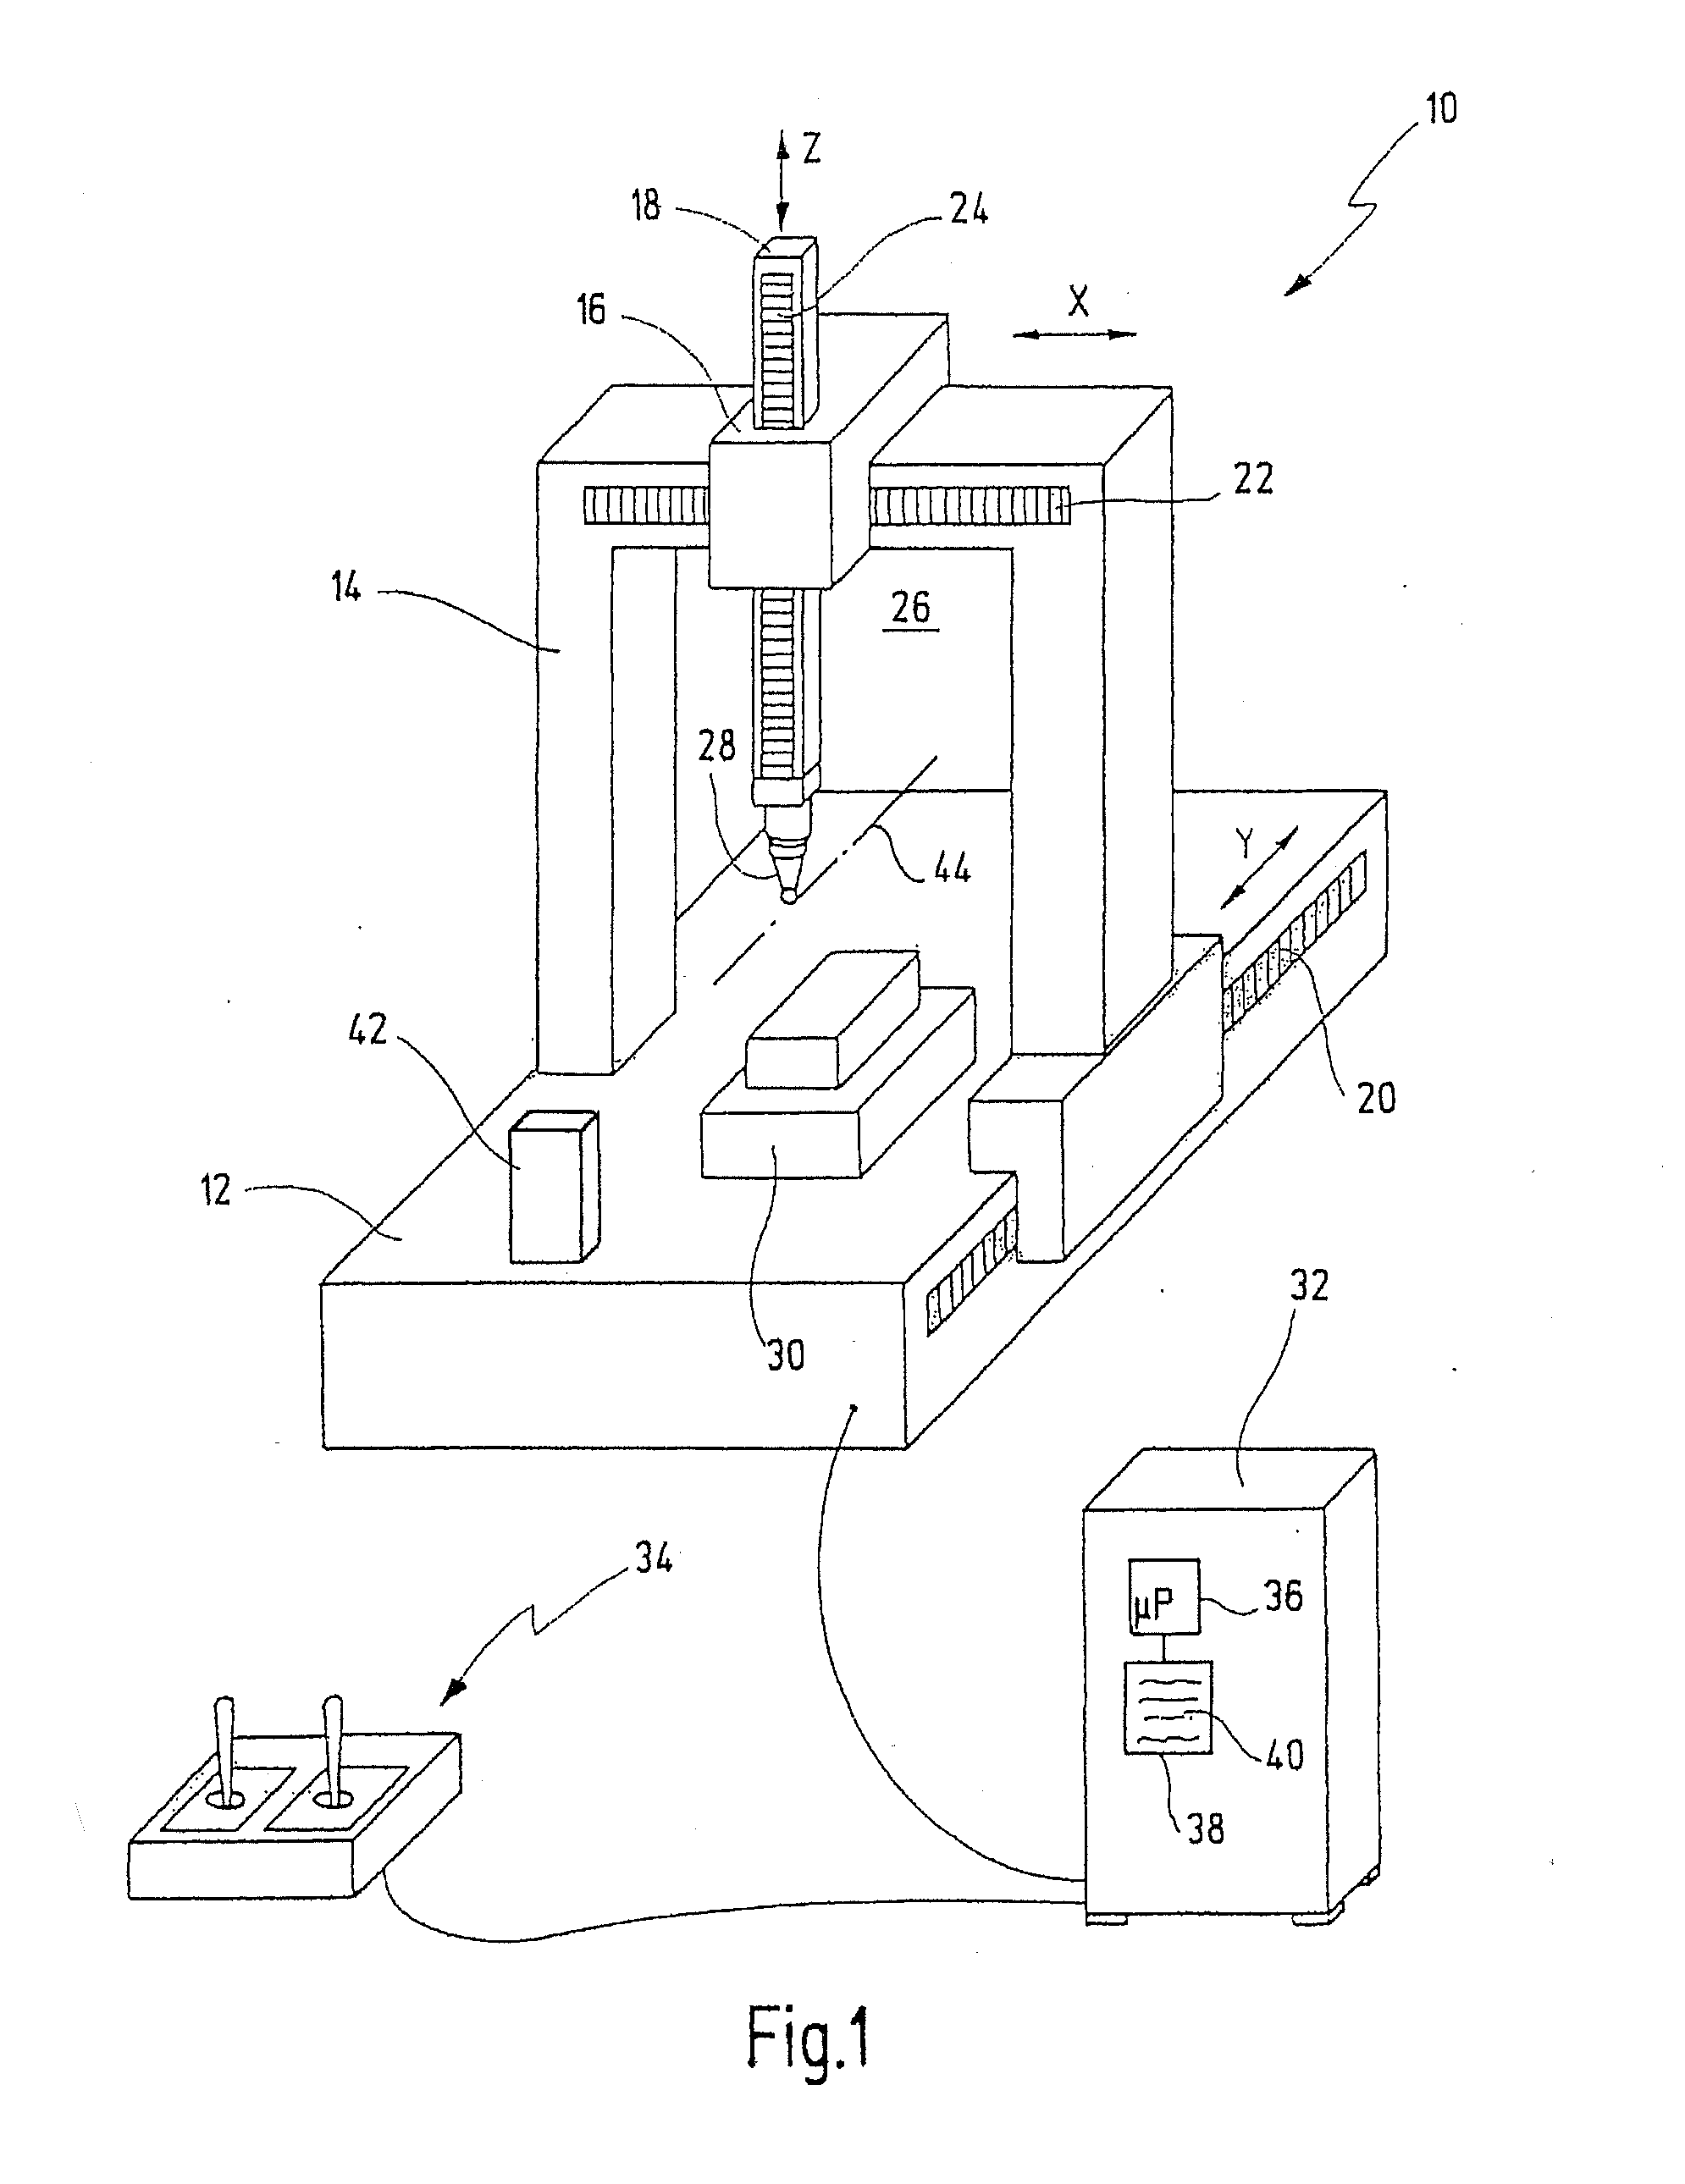 Method for determining correction values for correcting positional measurement errors in a machine having at least one translational axis of movement